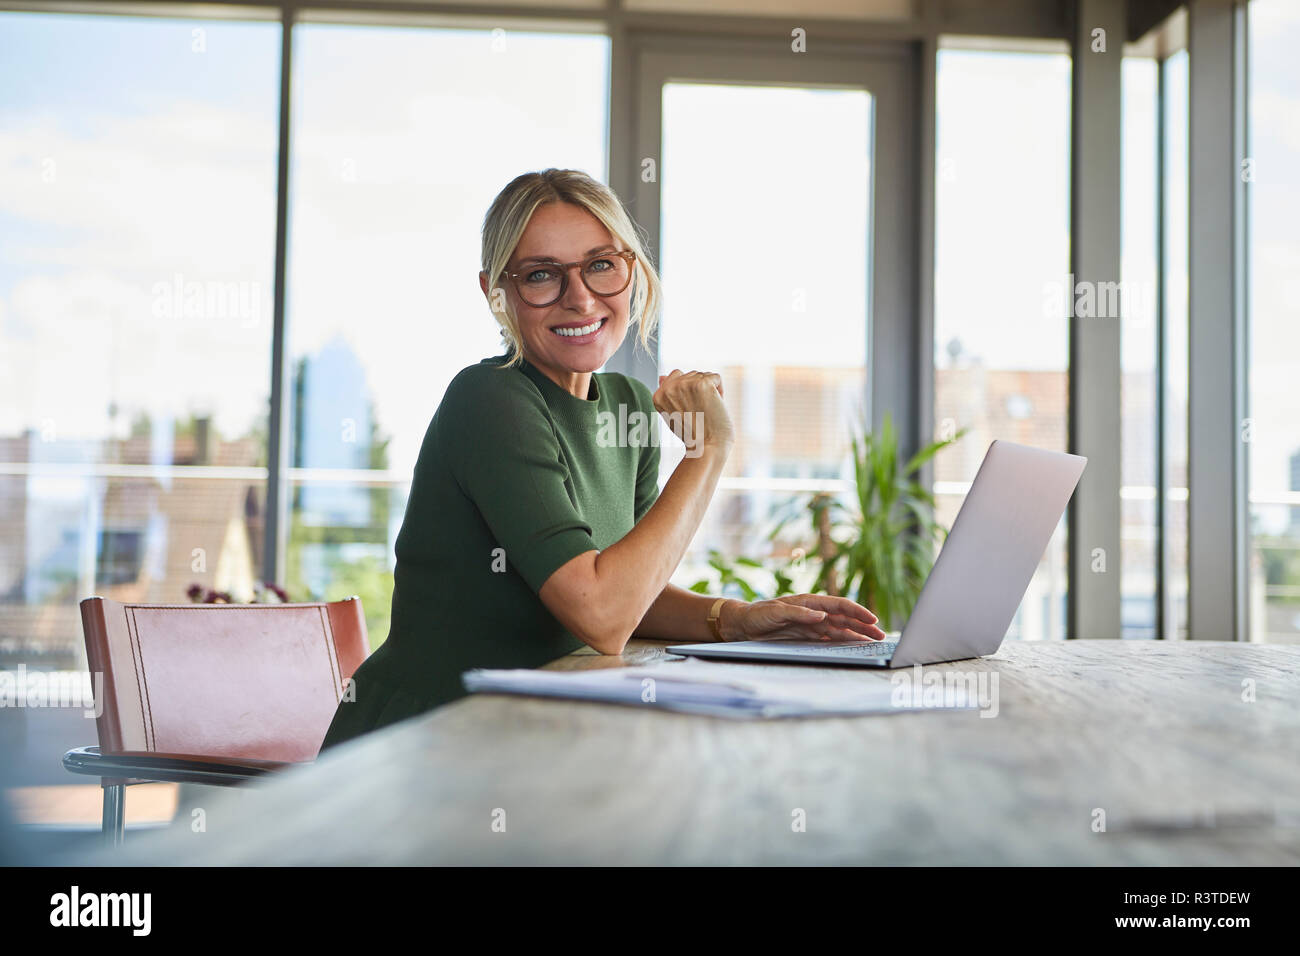 Portrait of smiling mature woman using laptop on table at home Stock Photo